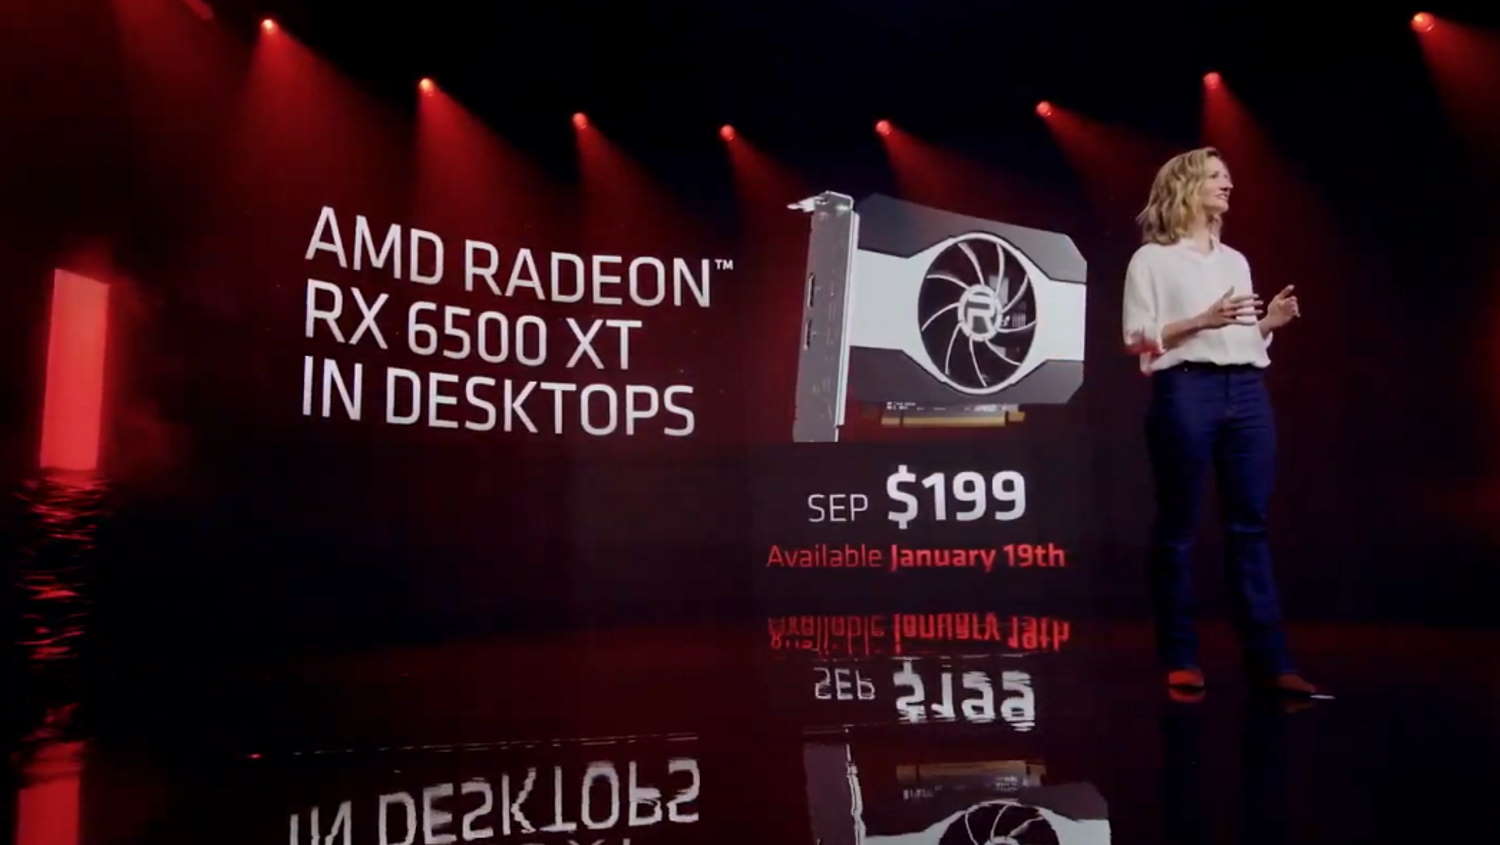  AMD has just announced the $199 RX 6500 XT graphics card coming January 19 